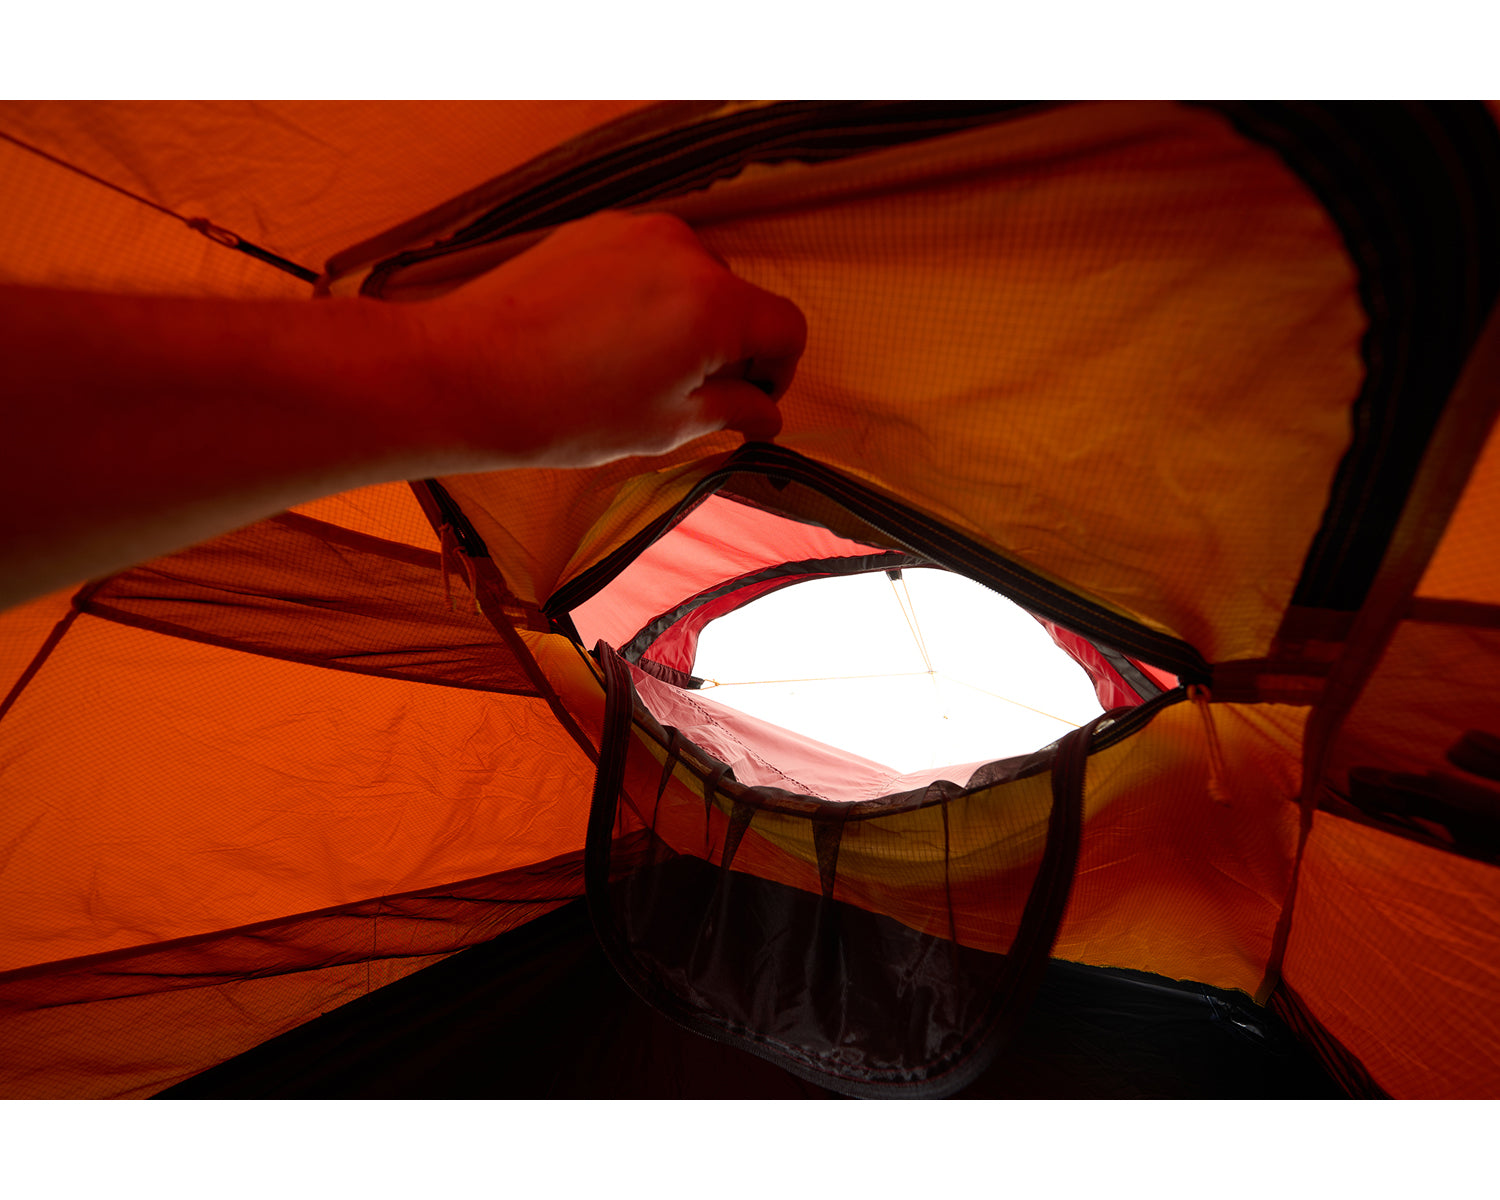 Seiland 2 SP tent - 2 person - Burnt Red